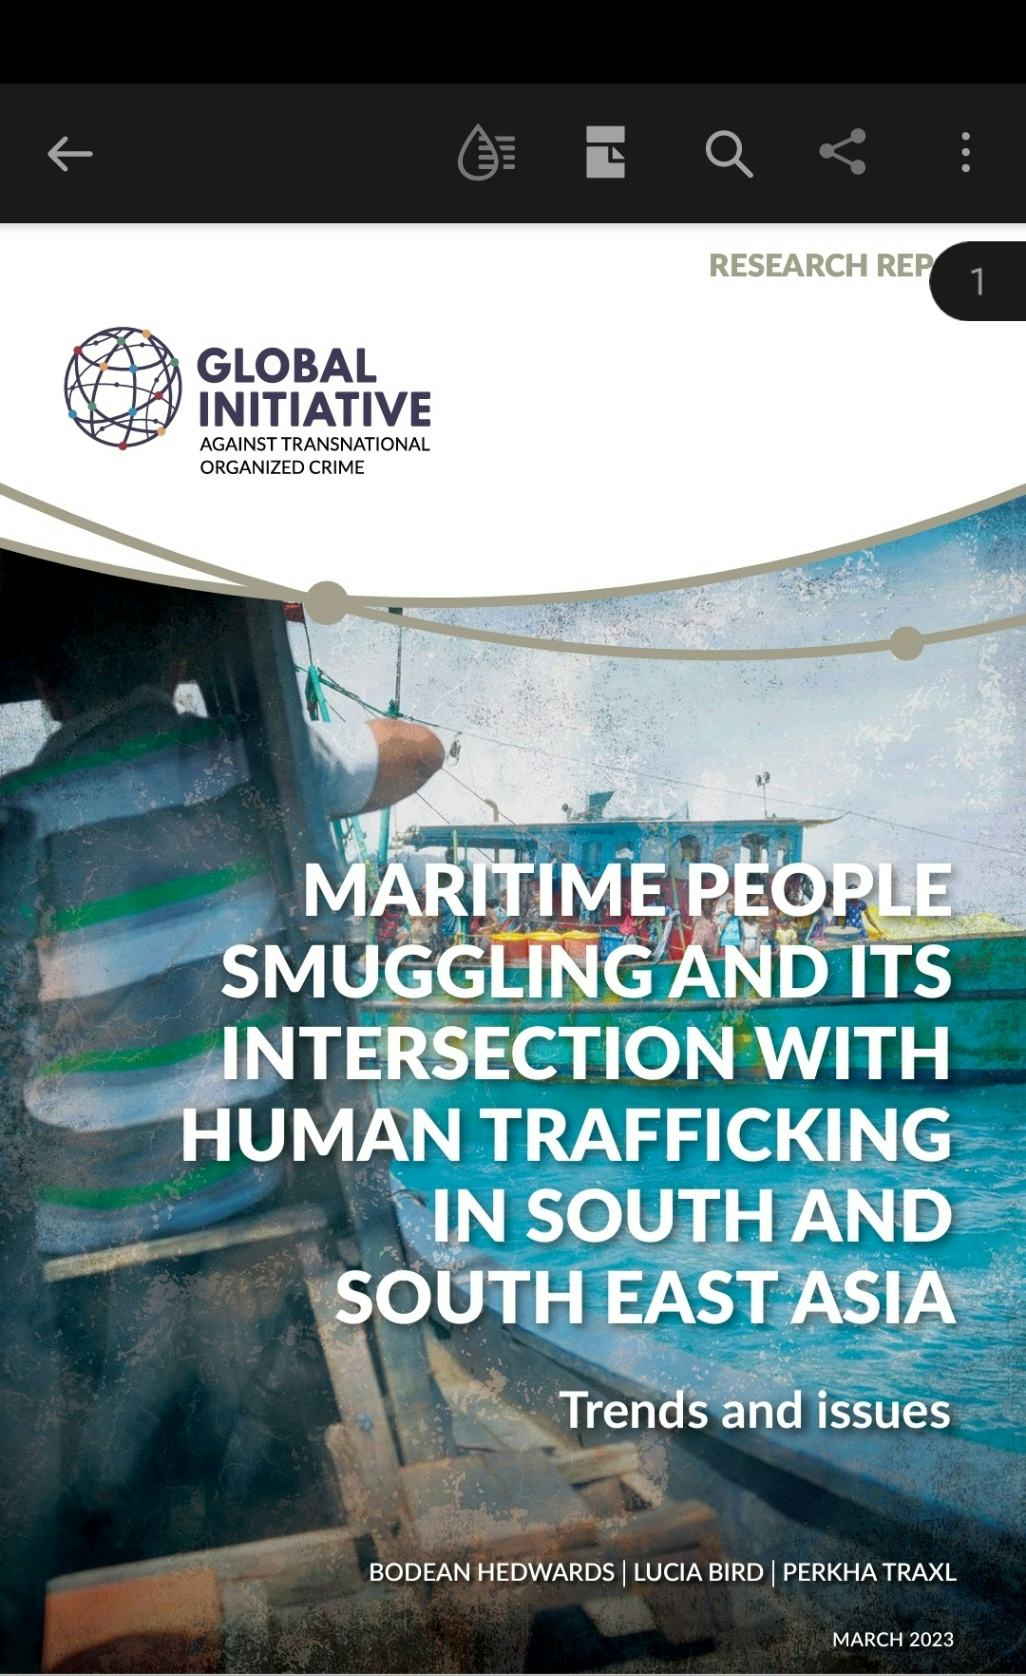 Illegal maritime migration cost 30,000 lives over four years